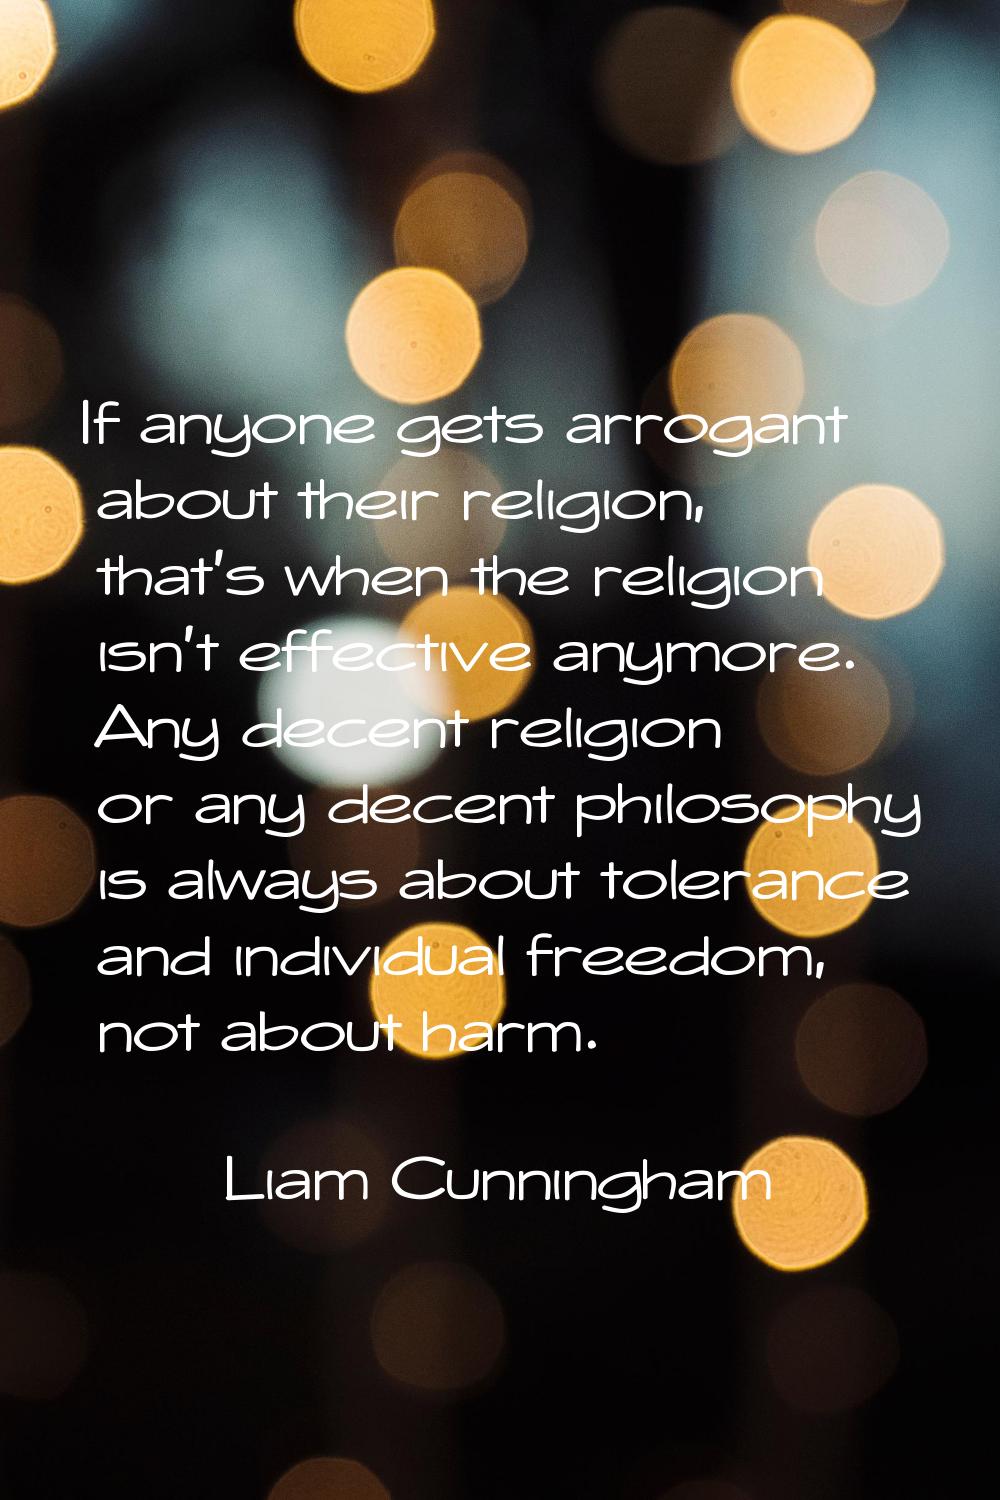 If anyone gets arrogant about their religion, that's when the religion isn't effective anymore. Any